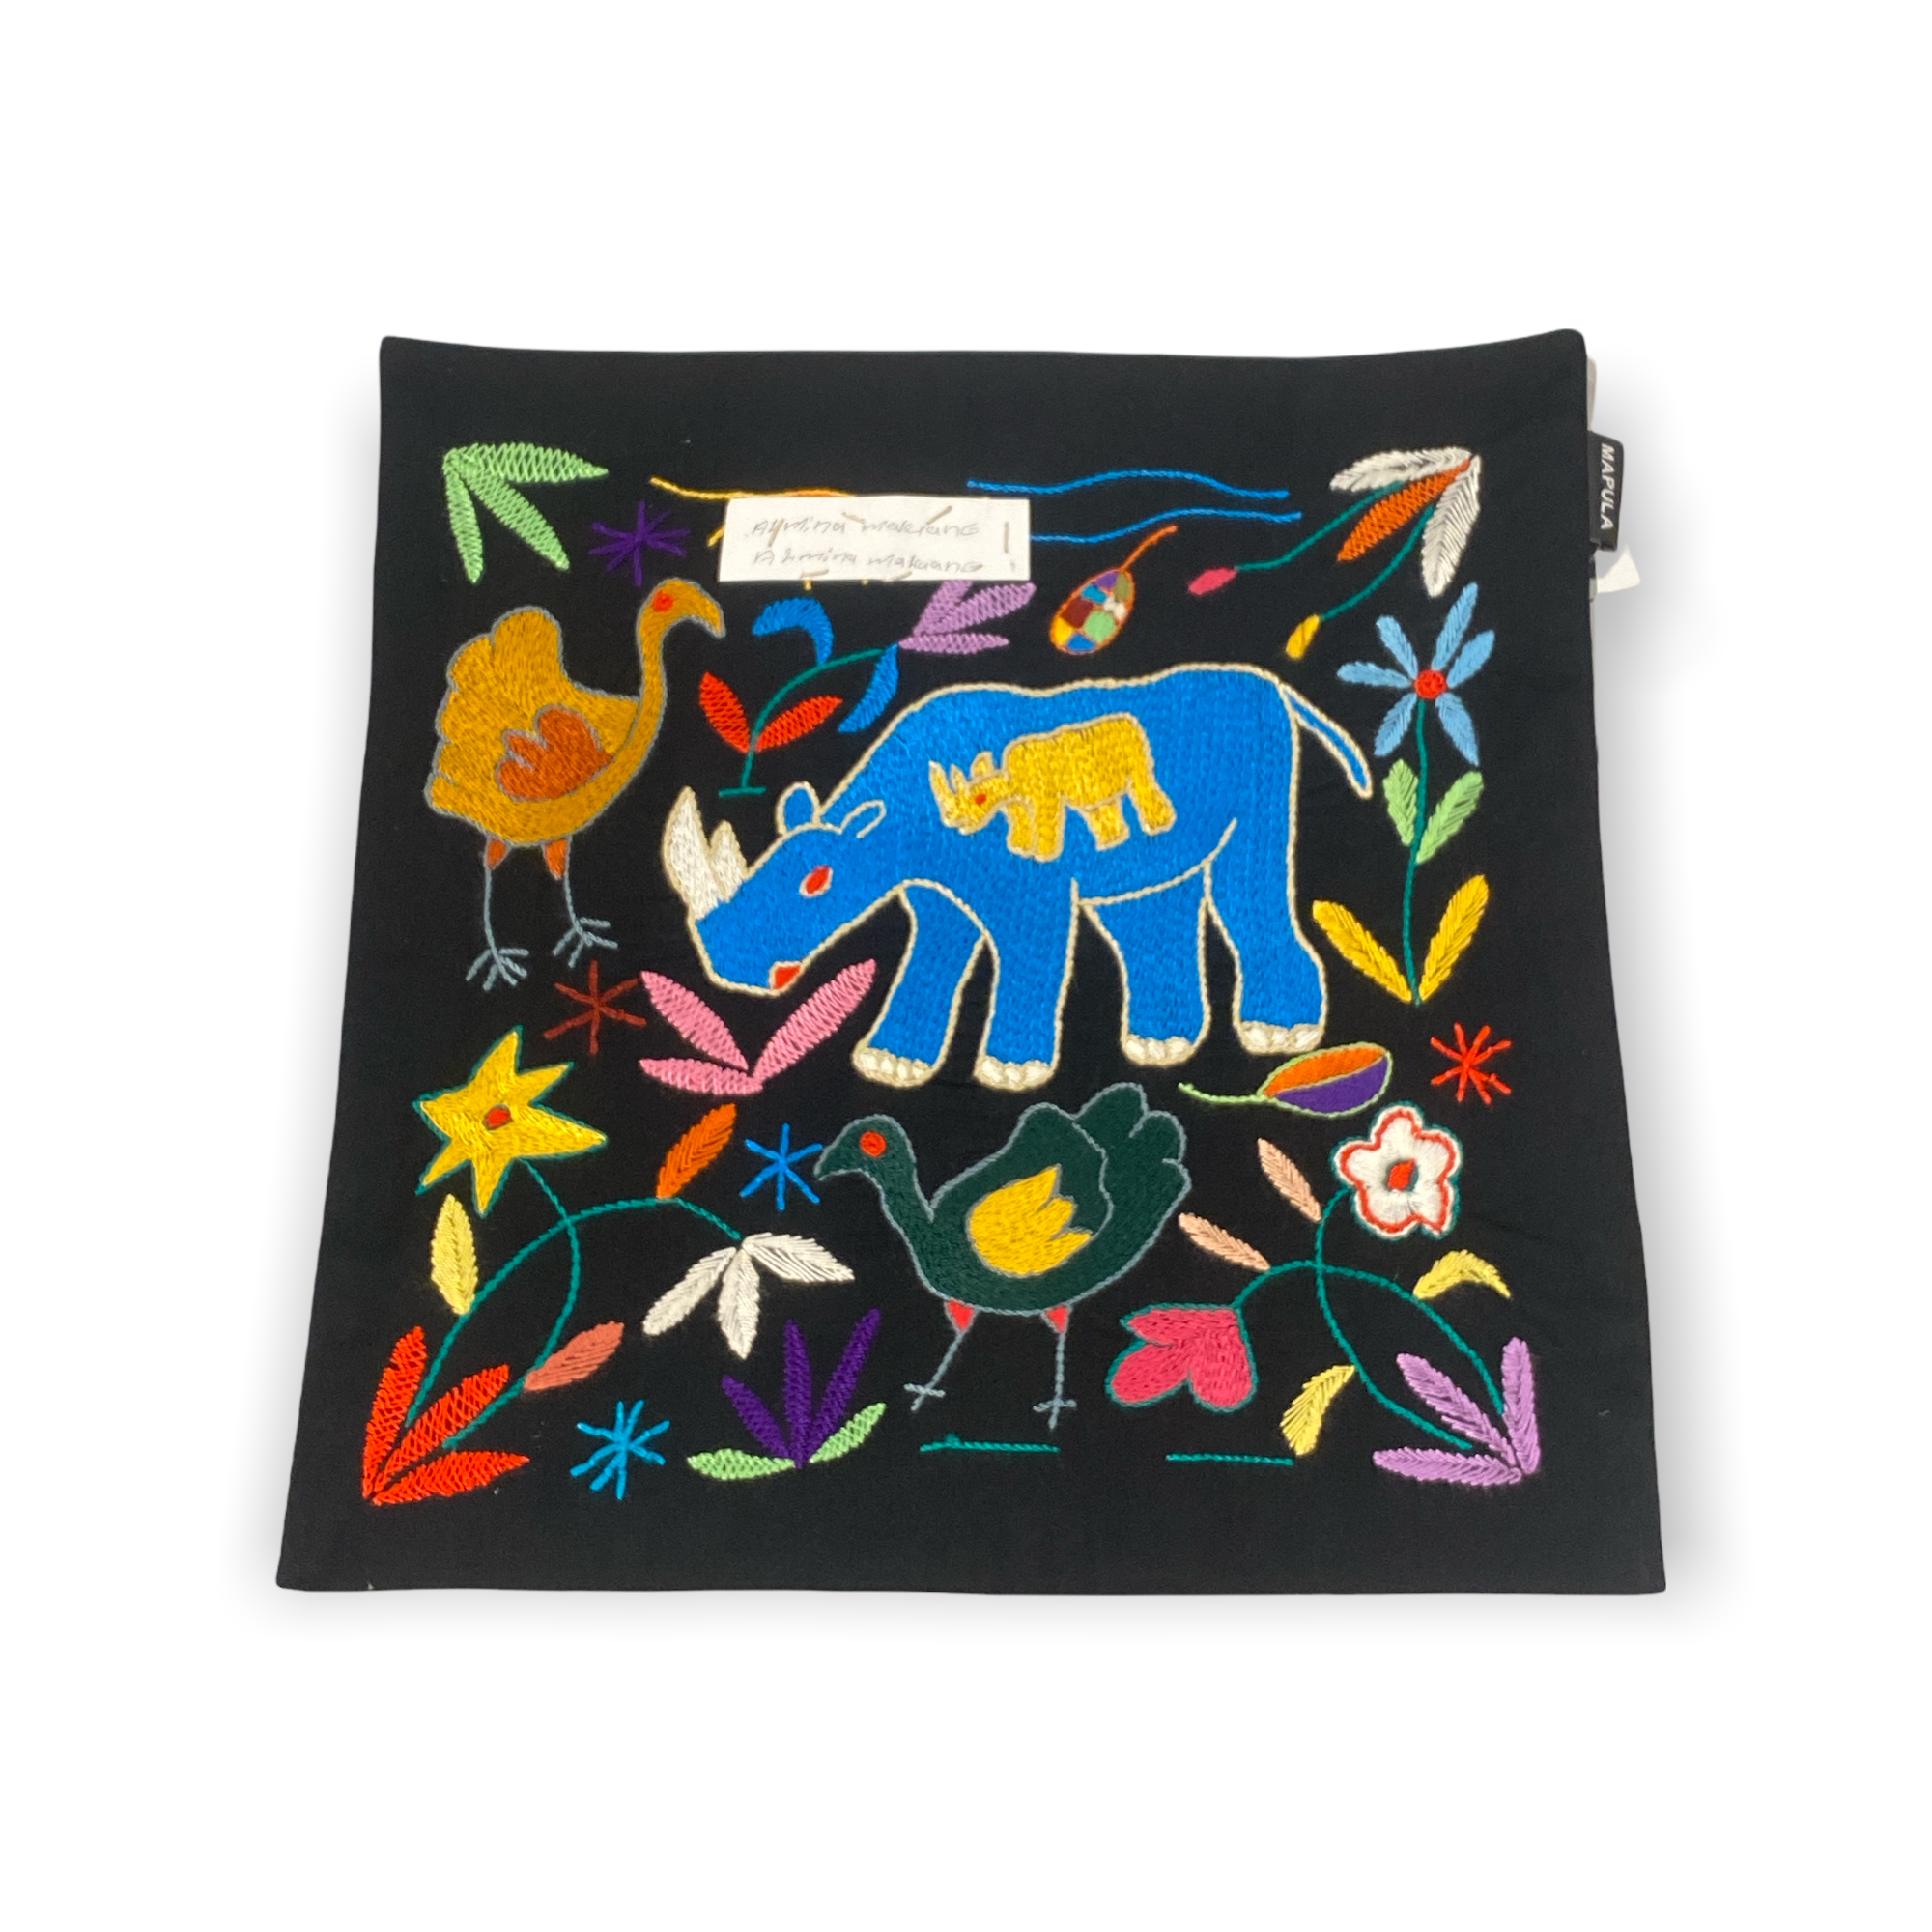 Mapula embroidered cushion 40x40 - South Africa